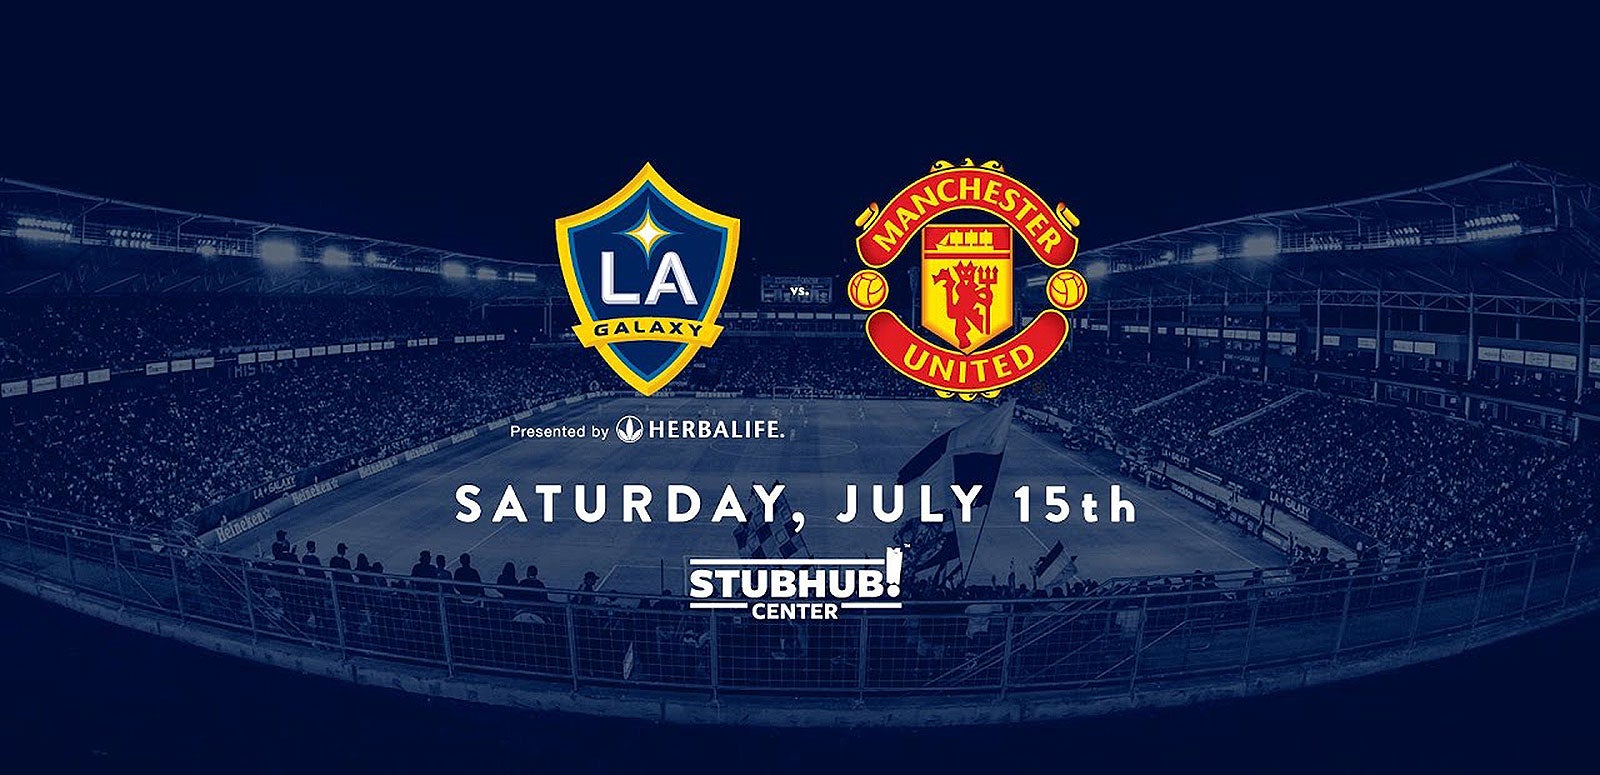 LA Galaxy struggle to sell out measly 27,000 capacity stadium for  pre-season friendly against Manchester United